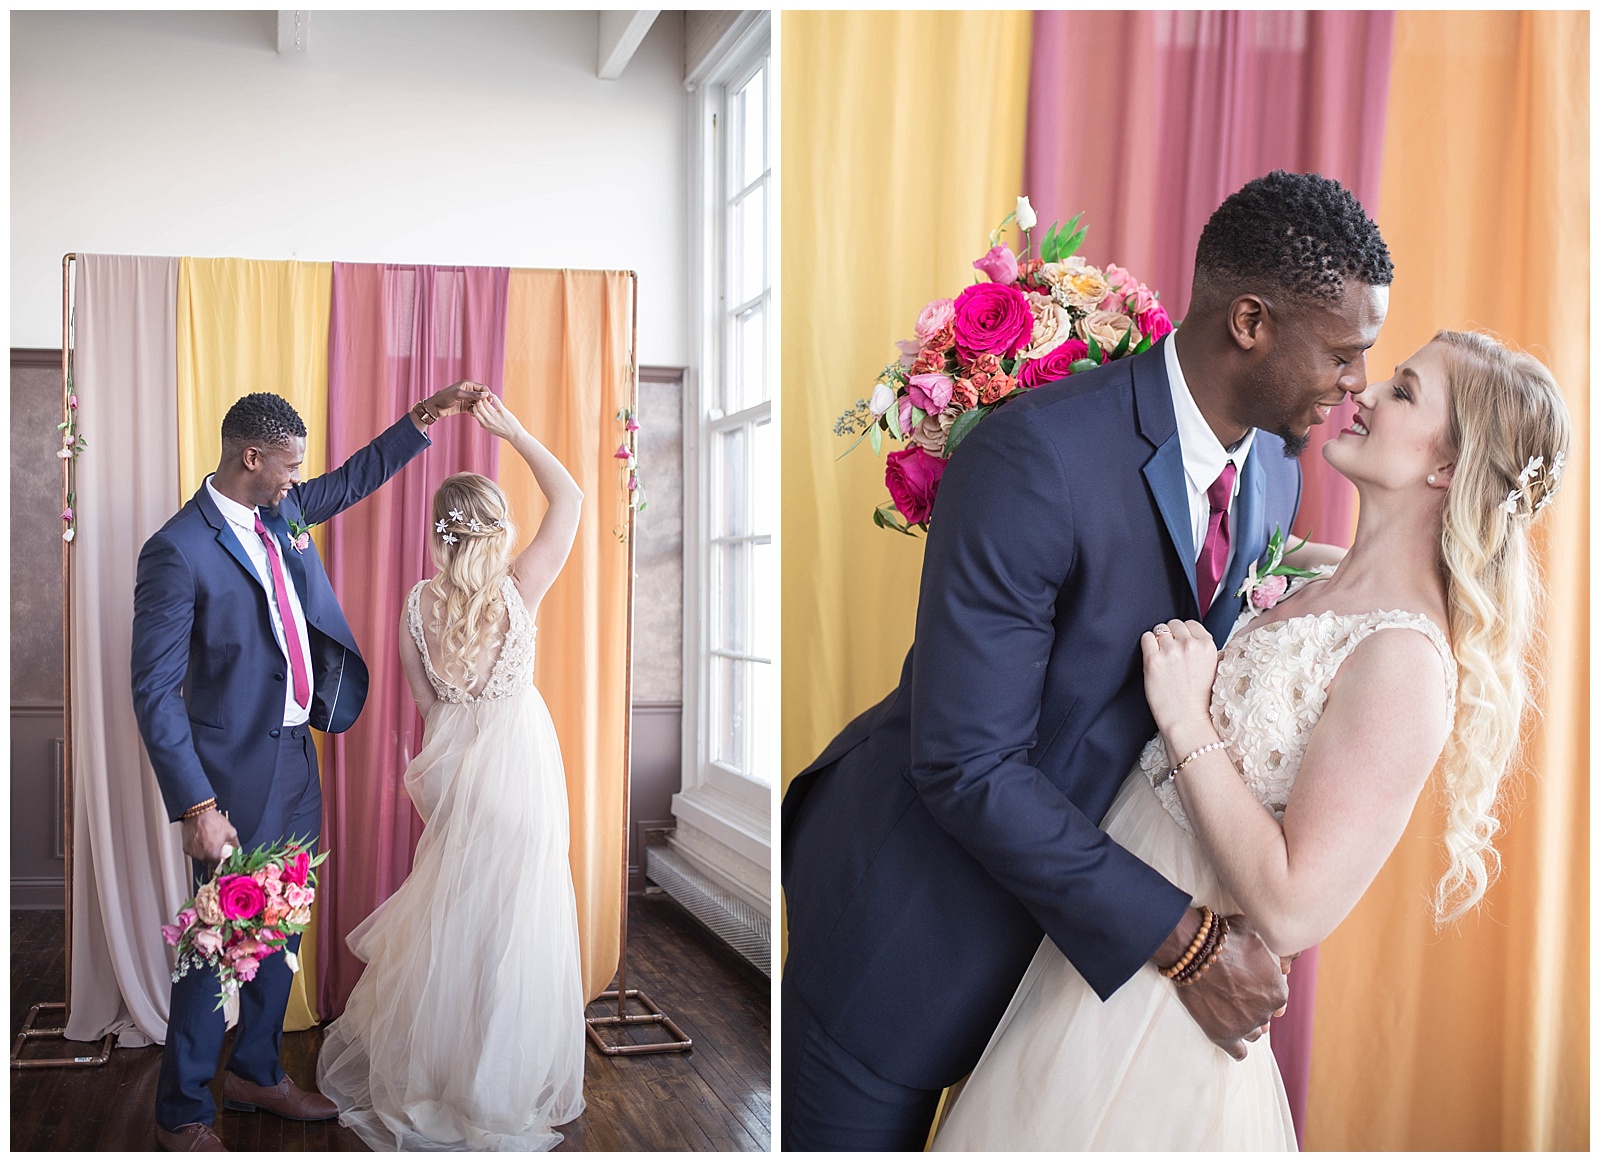 Colorful Styled Shoot | Monica Brown Photography | monicabrownphoto.com 